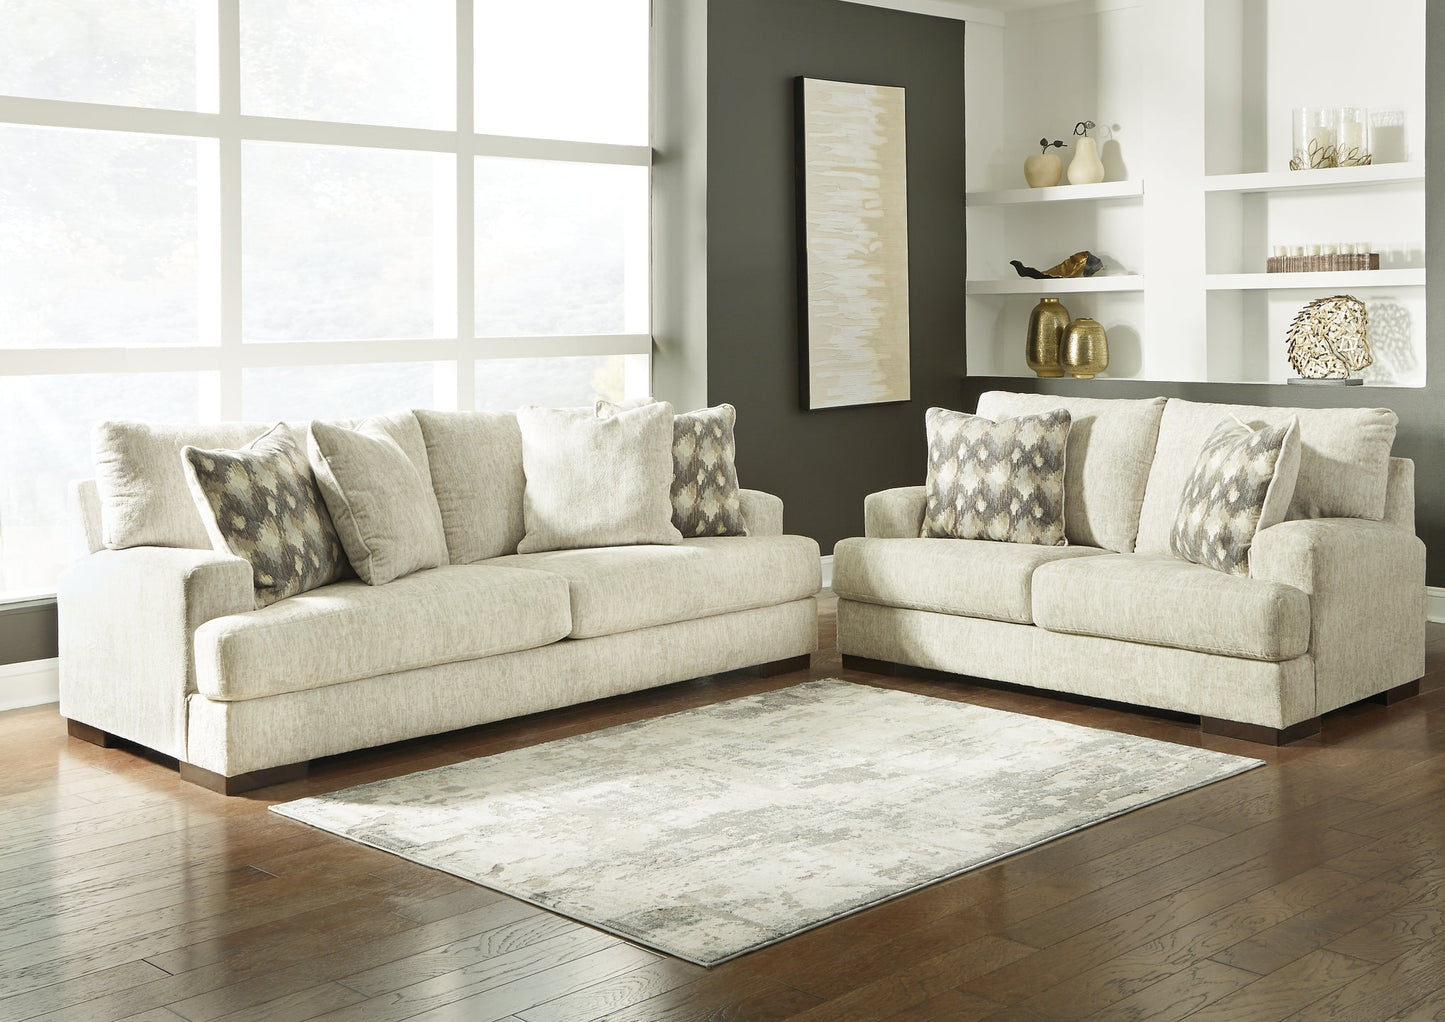 Caretti Sofa, Loveseat, Chair and Ottoman Rent Wise Rent To Own Jacksonville, Florida